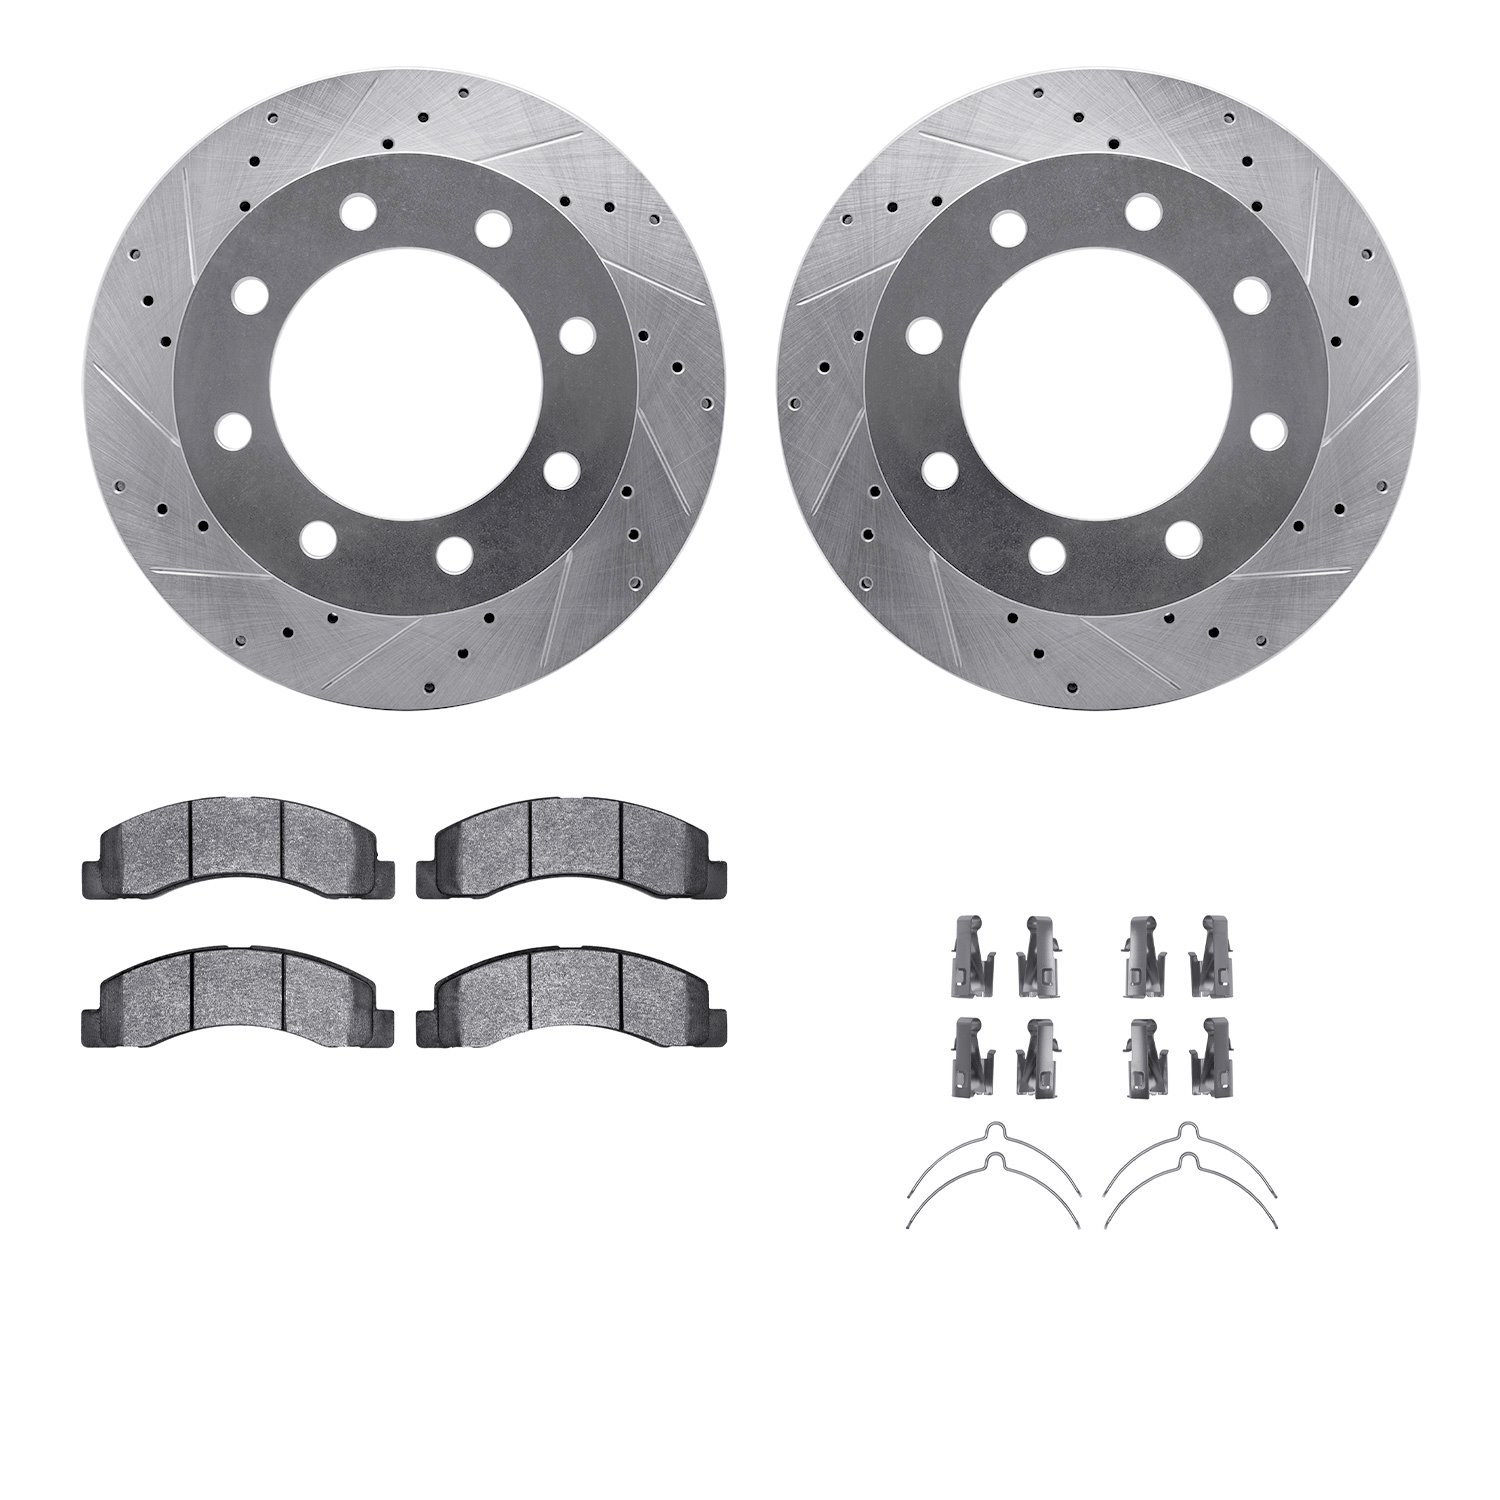 7412-54043 Drilled/Slotted Brake Rotors with Ultimate-Duty Brake Pads Kit & Hardware [Silver], 1999-1999 Ford/Lincoln/Mercury/Ma